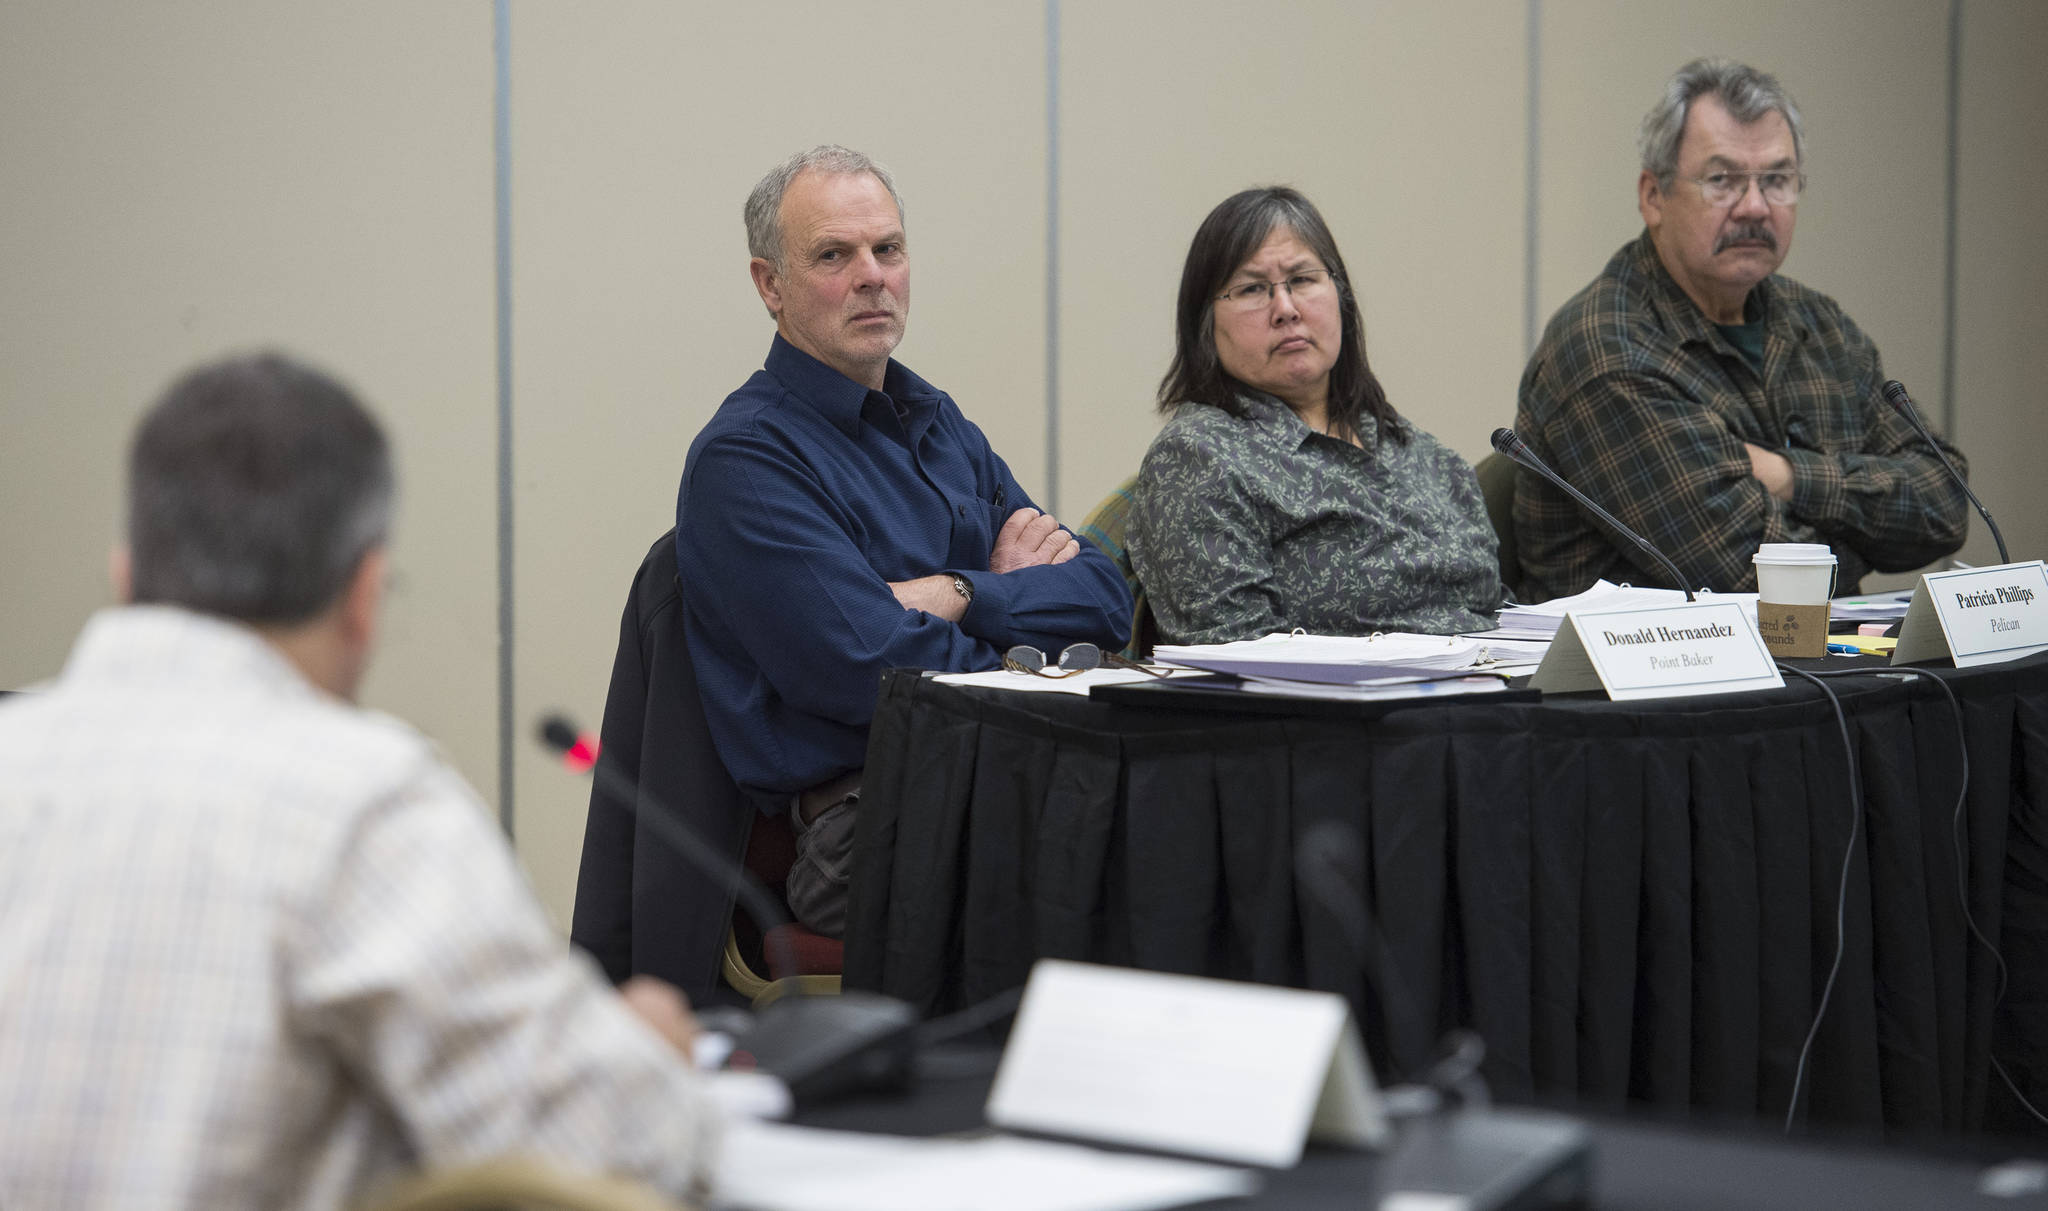 Donald Hernandez, center, of Point Baker, Patricia Phillips, of Pelican, and Michael Douville, of Craig, right, listen to Terry Suminski, with the U.S. Forest Service in Sitka, as the Southeast Alaska Subsistence Regional Advisory Council holds its meeting in Elizabeth Peratrovich Hall on Wednesday, Nov. 1, 2017. (Michael Penn | Juneau Empire)